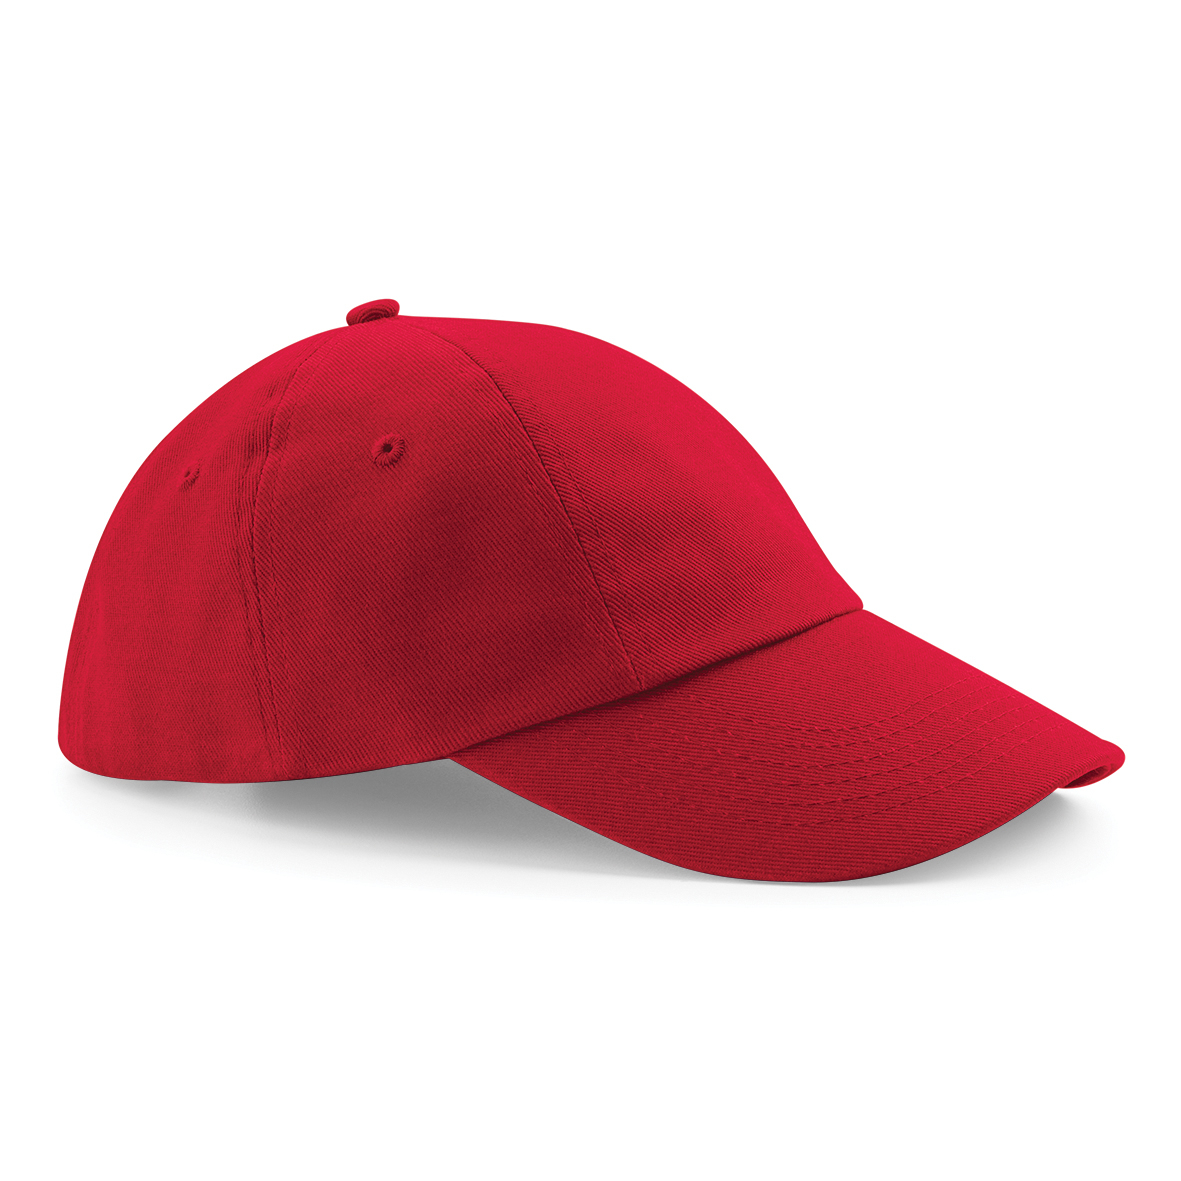 Low Profile Cap in red with seamless, centralised front panel